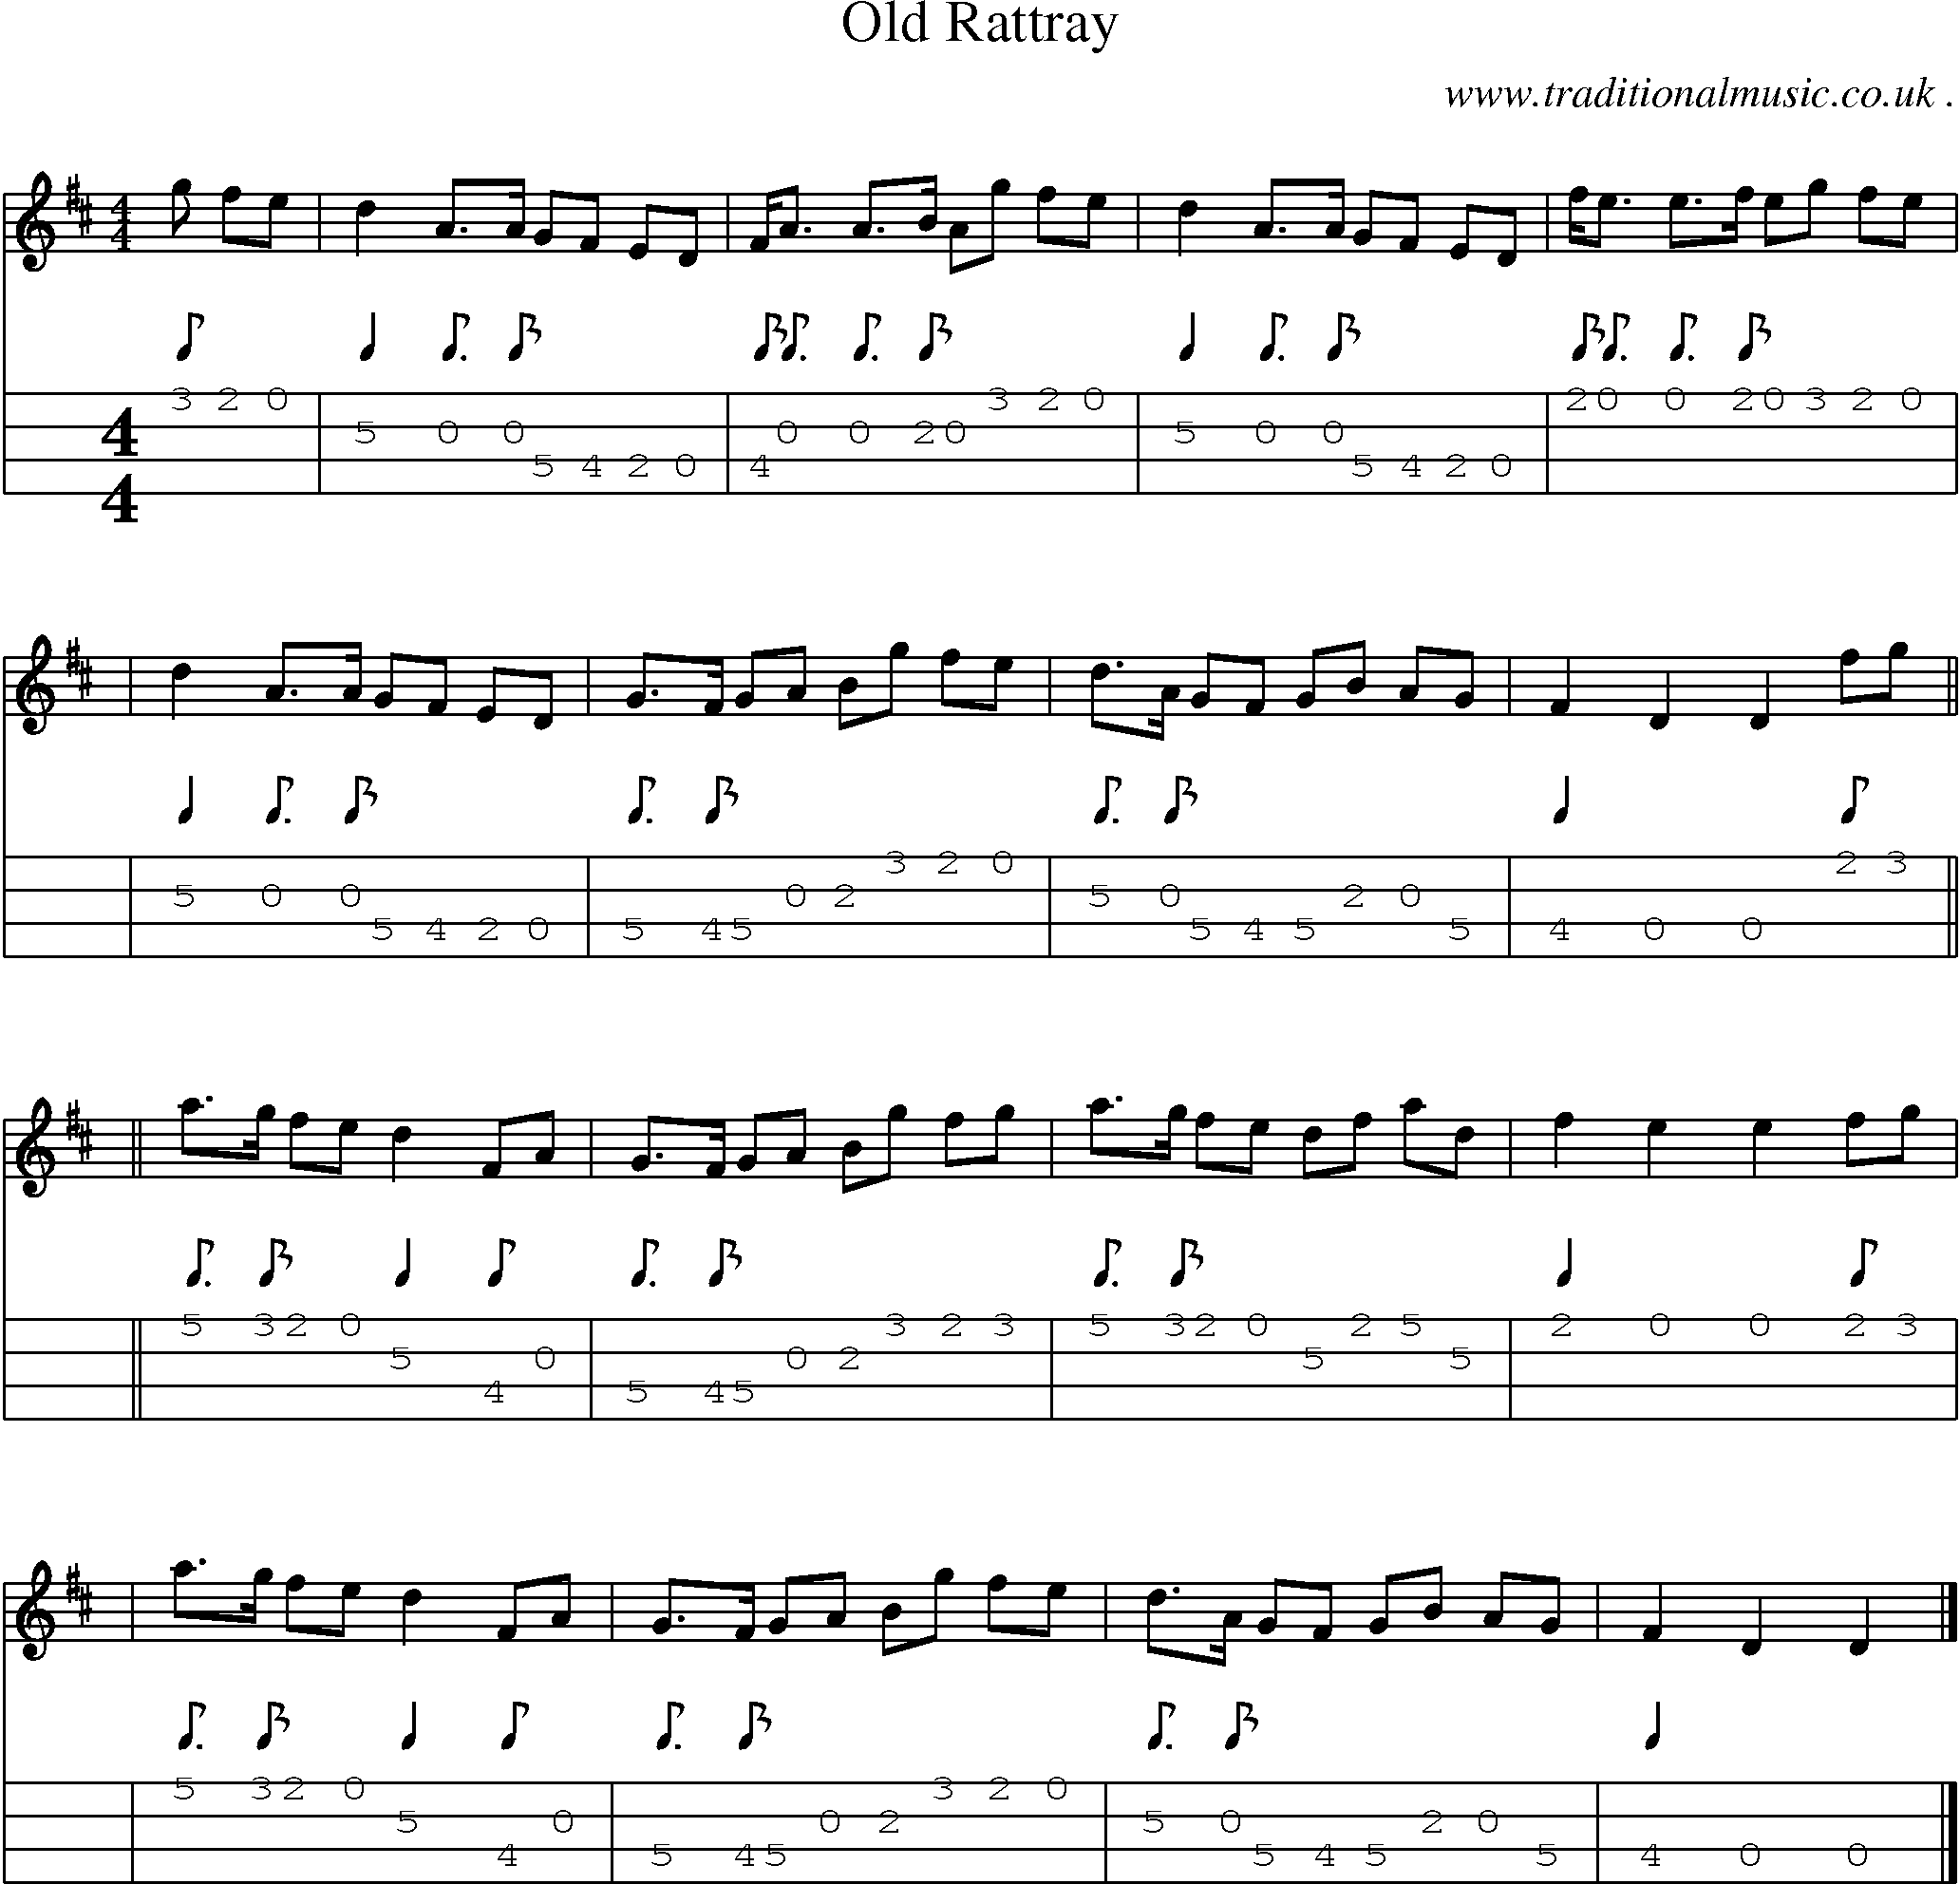 Sheet-music  score, Chords and Mandolin Tabs for Old Rattray